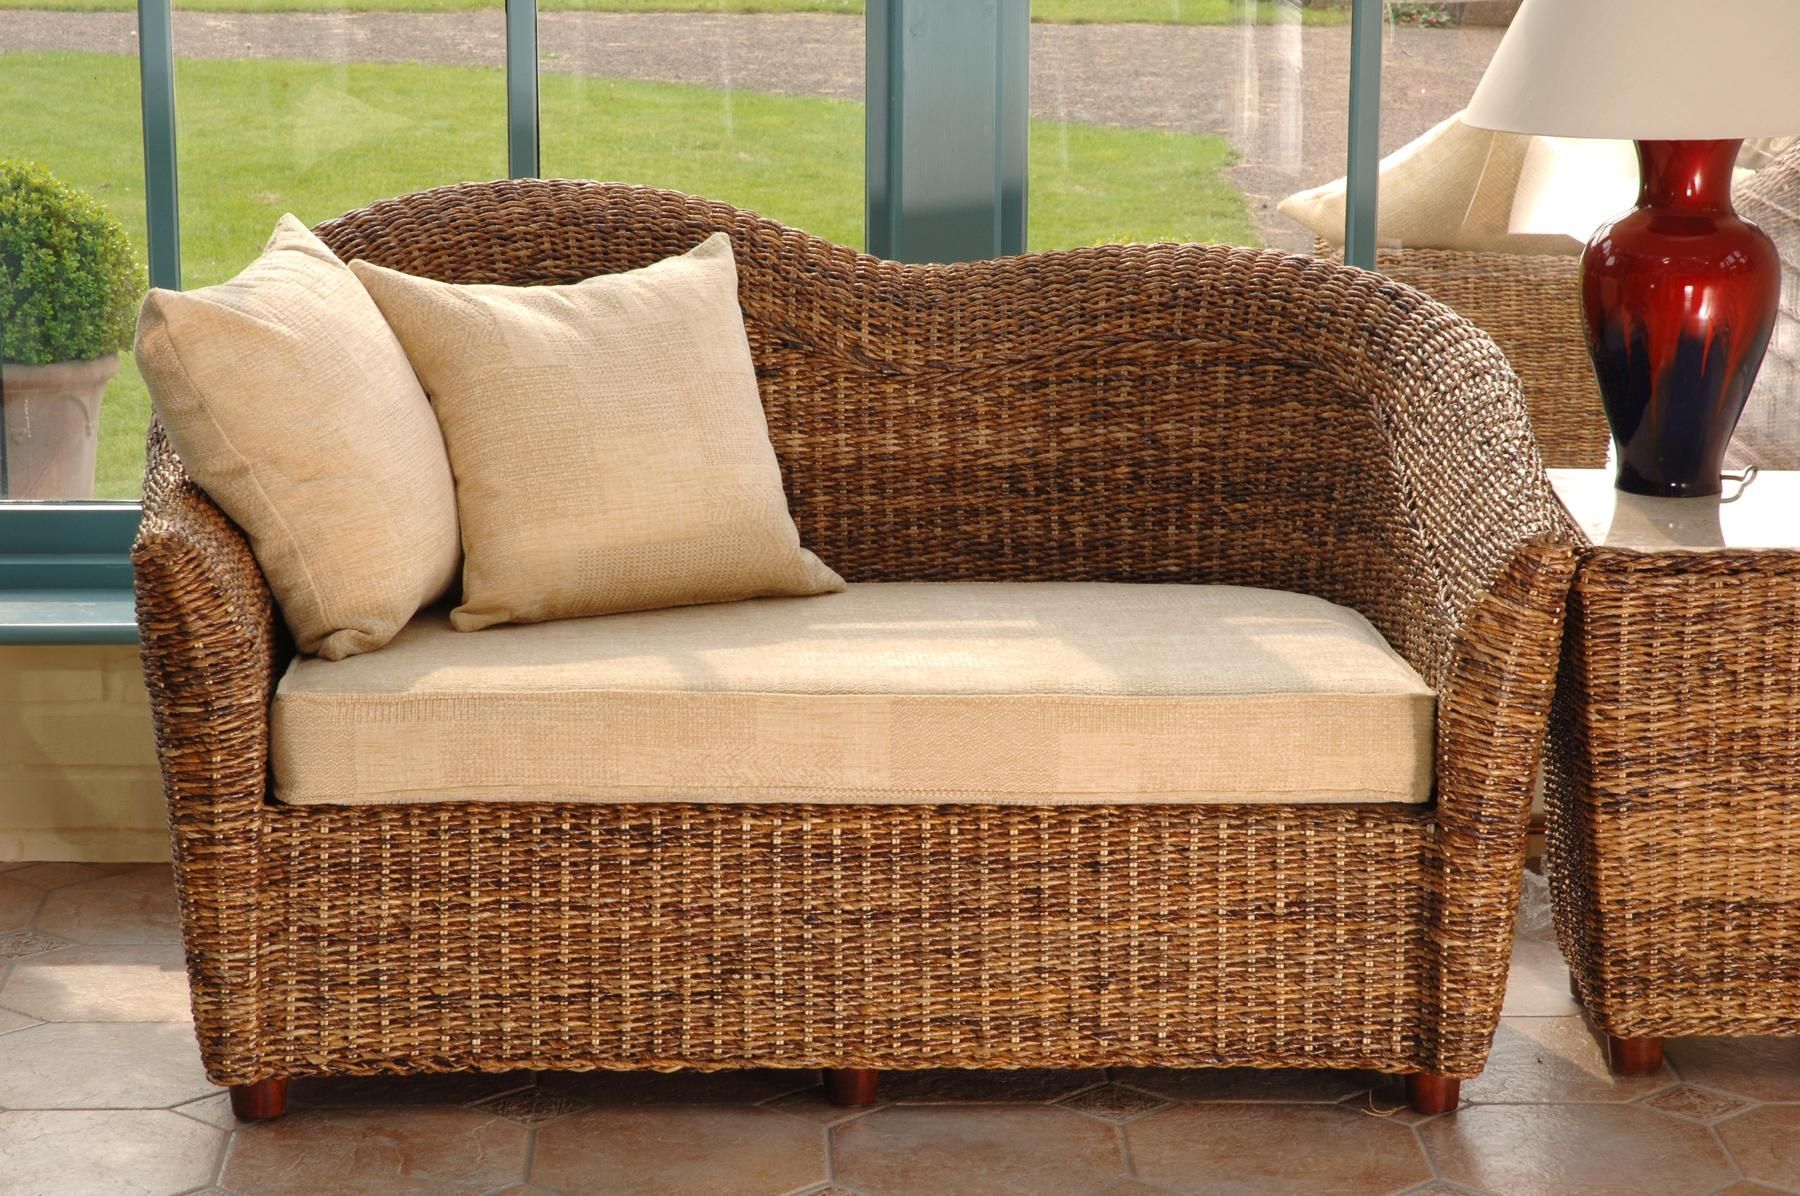 Cane Sofa Set With Ideas Hd Photos 46955 | Kengire Intended For Ken Sofa Sets (View 1 of 20)